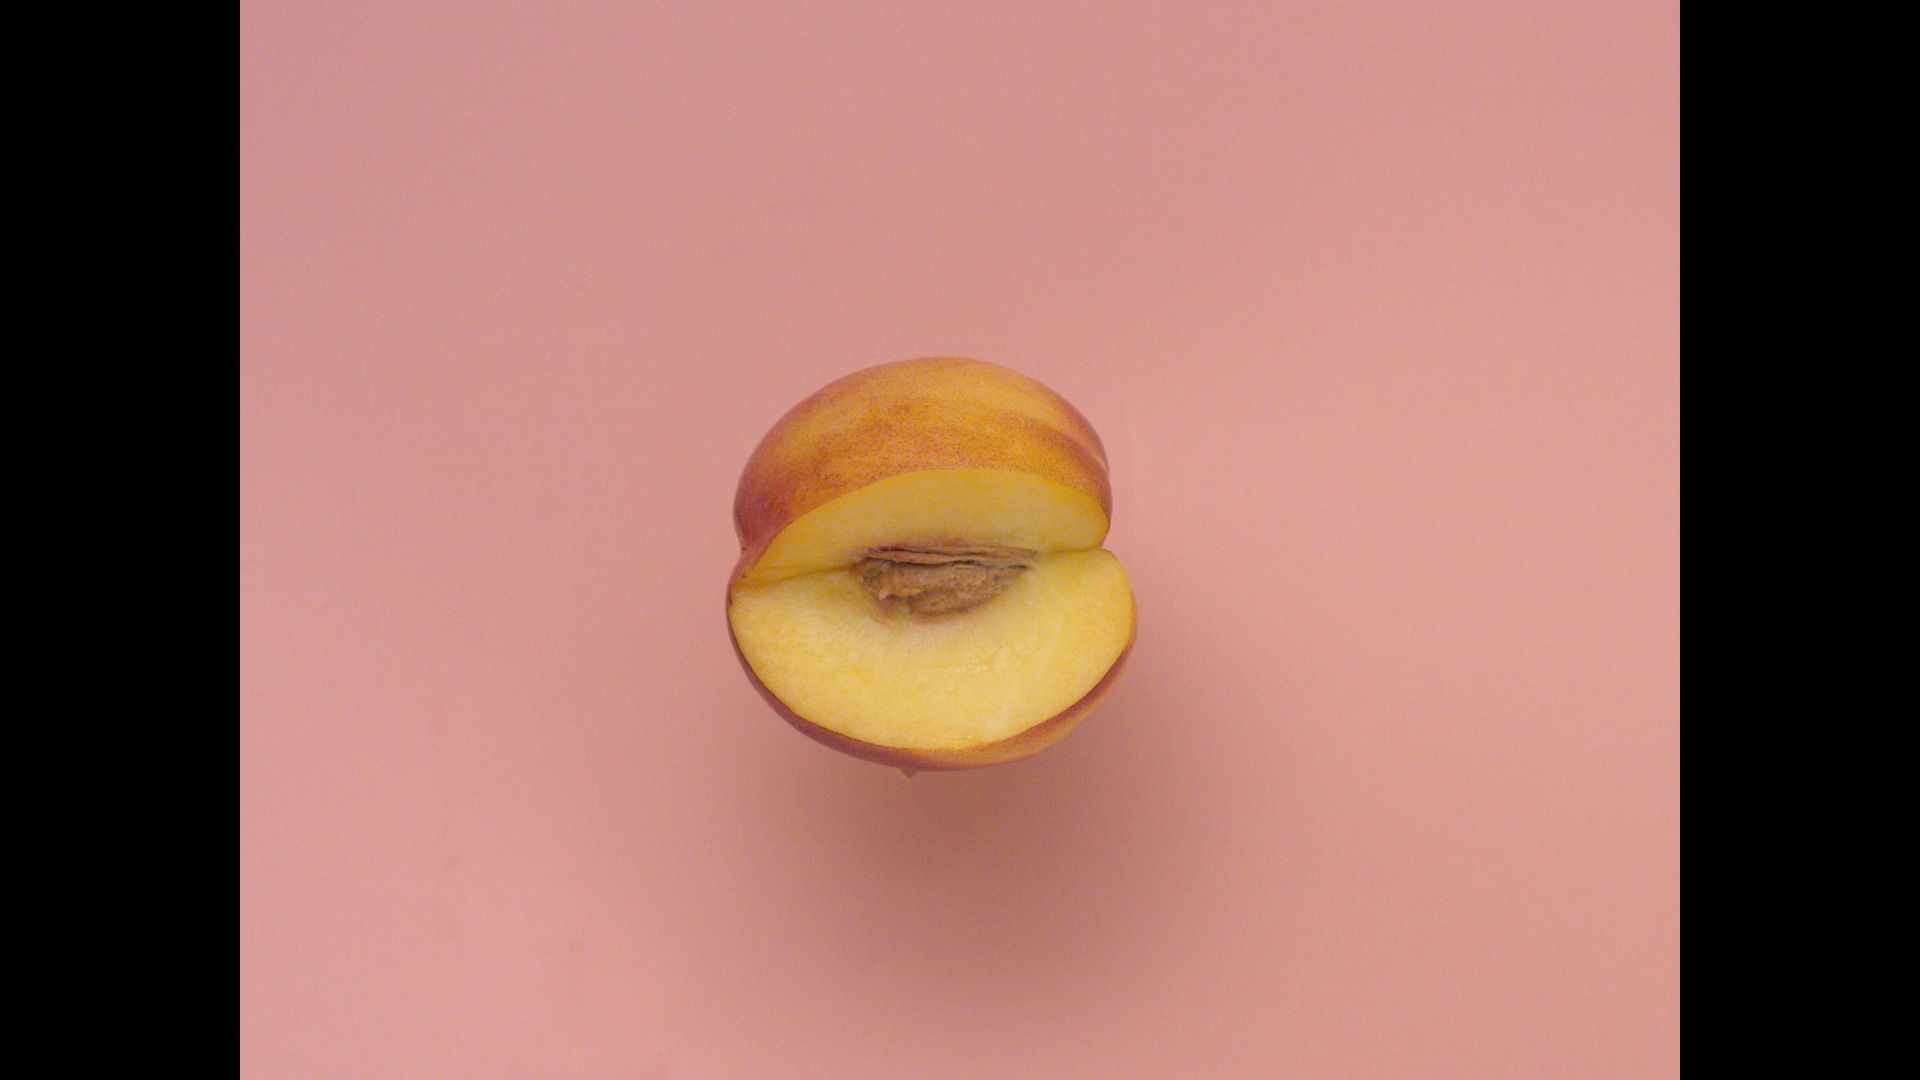 eszter galambos, Peach in front of a pink background